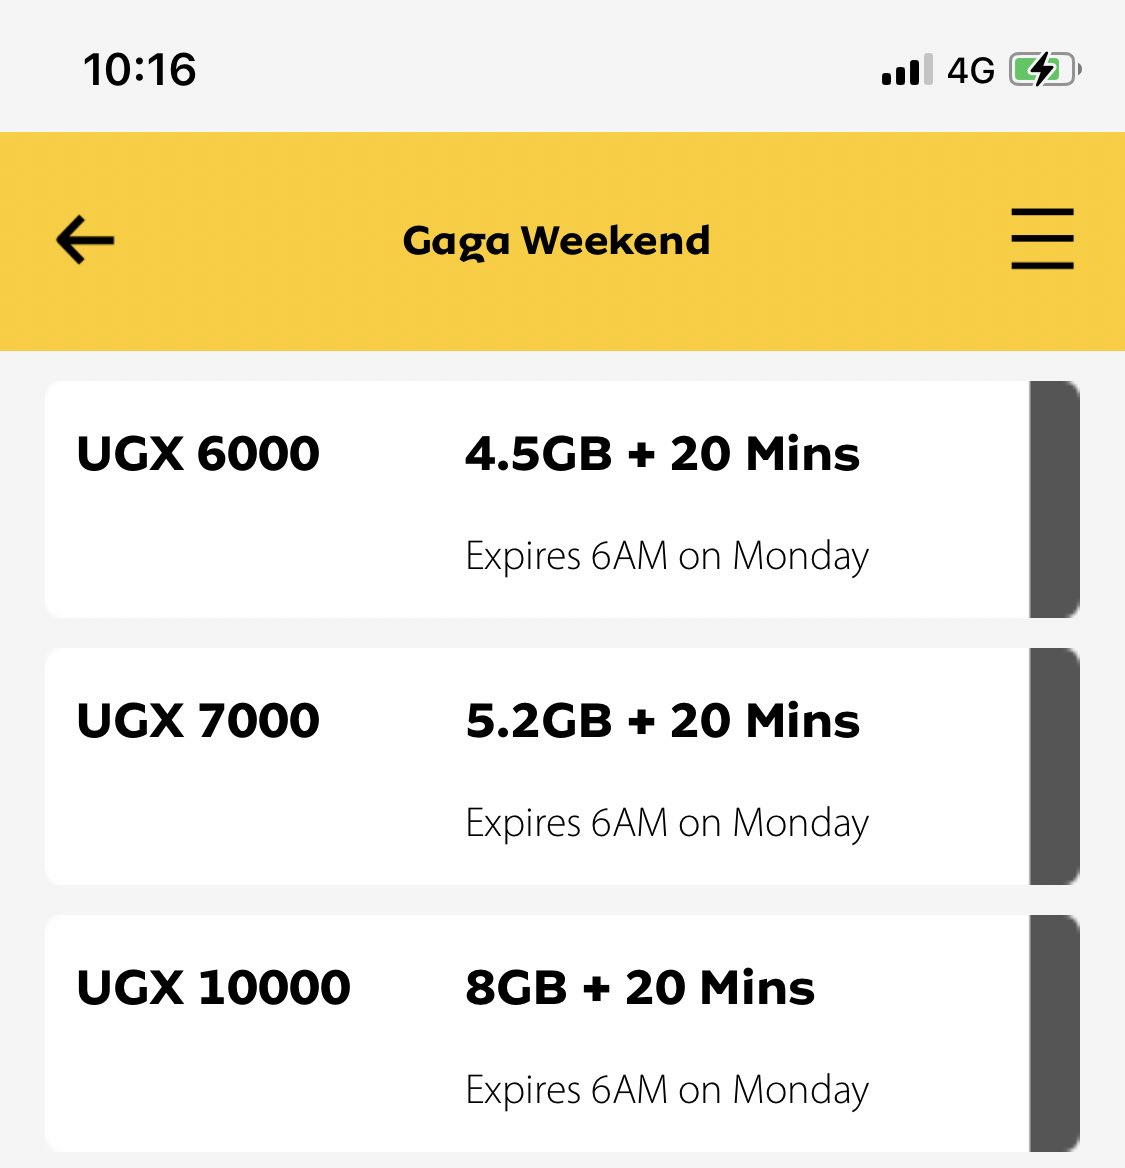 1st #GagaWeekend of the year has arrove 🕺🏾
Dial *100*0# to get the offers.
Enjoy the #UnstoppableNetwork